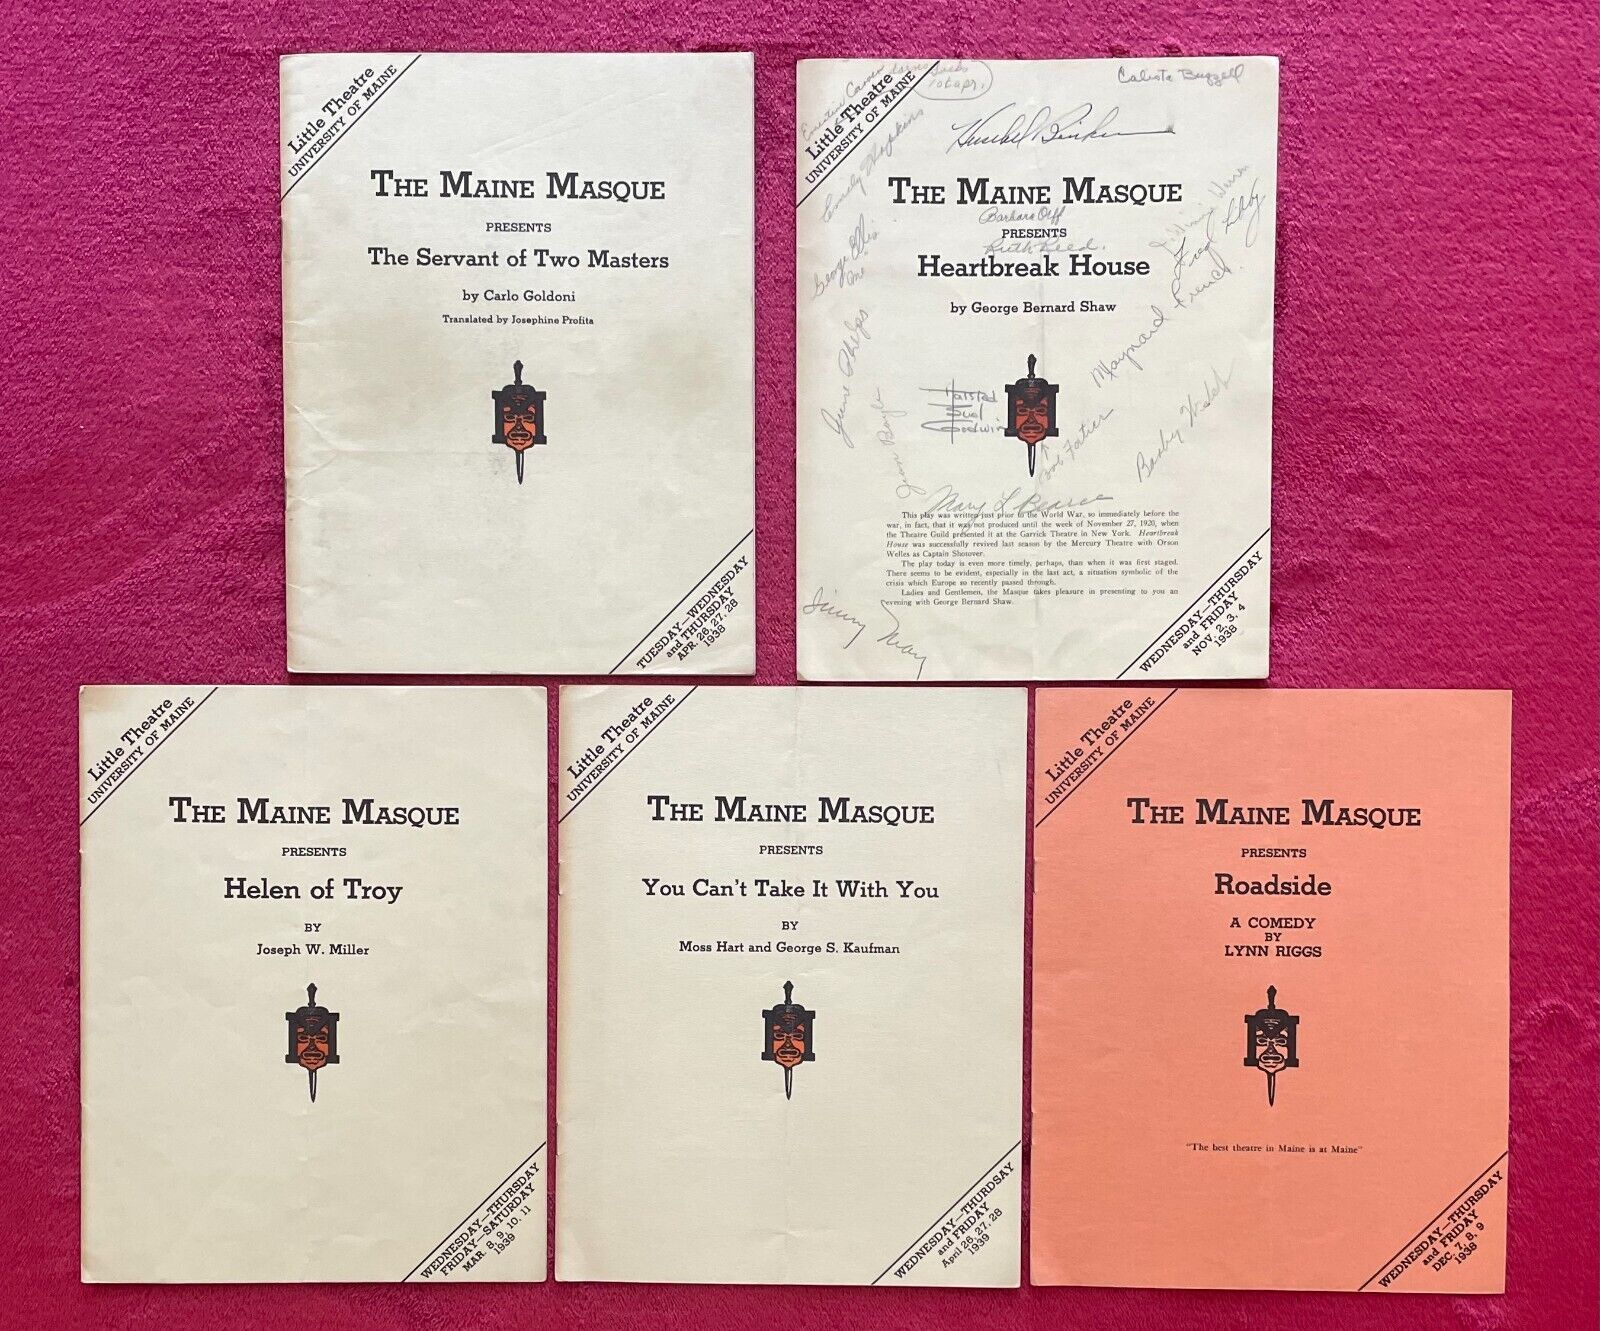 THE MAINE MASQUE LITTLE THEATRE UNIVERSITY OF MAINE PLAYBILLS 1938 39 - 1 SIGNED